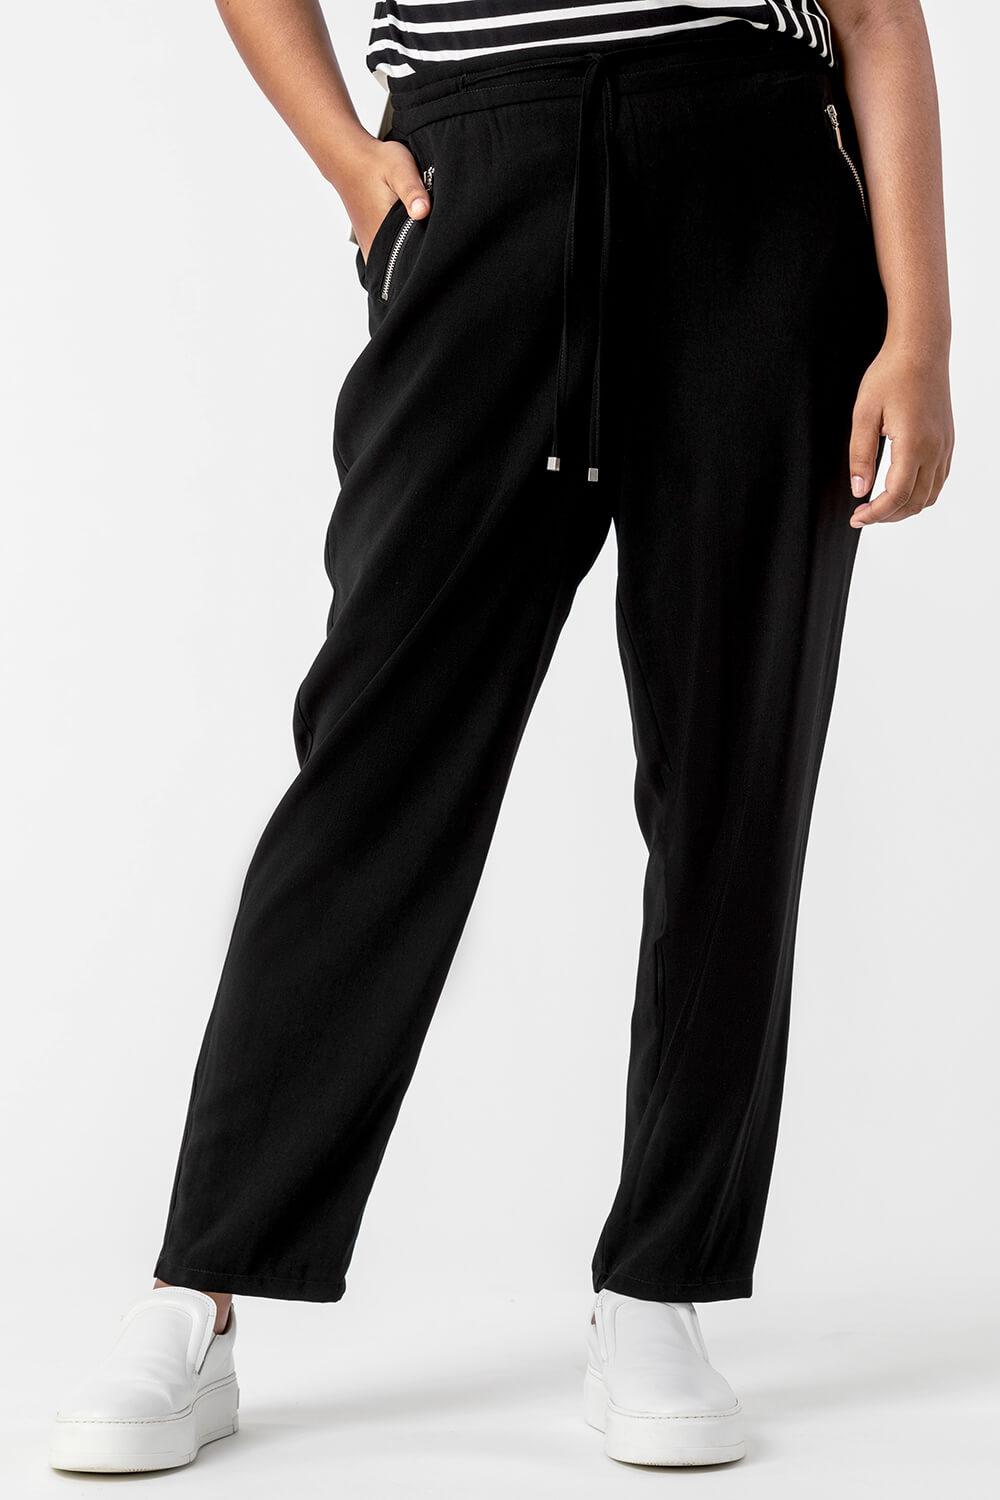 Black Curve 29" Tie Front Joggers, Image 4 of 5